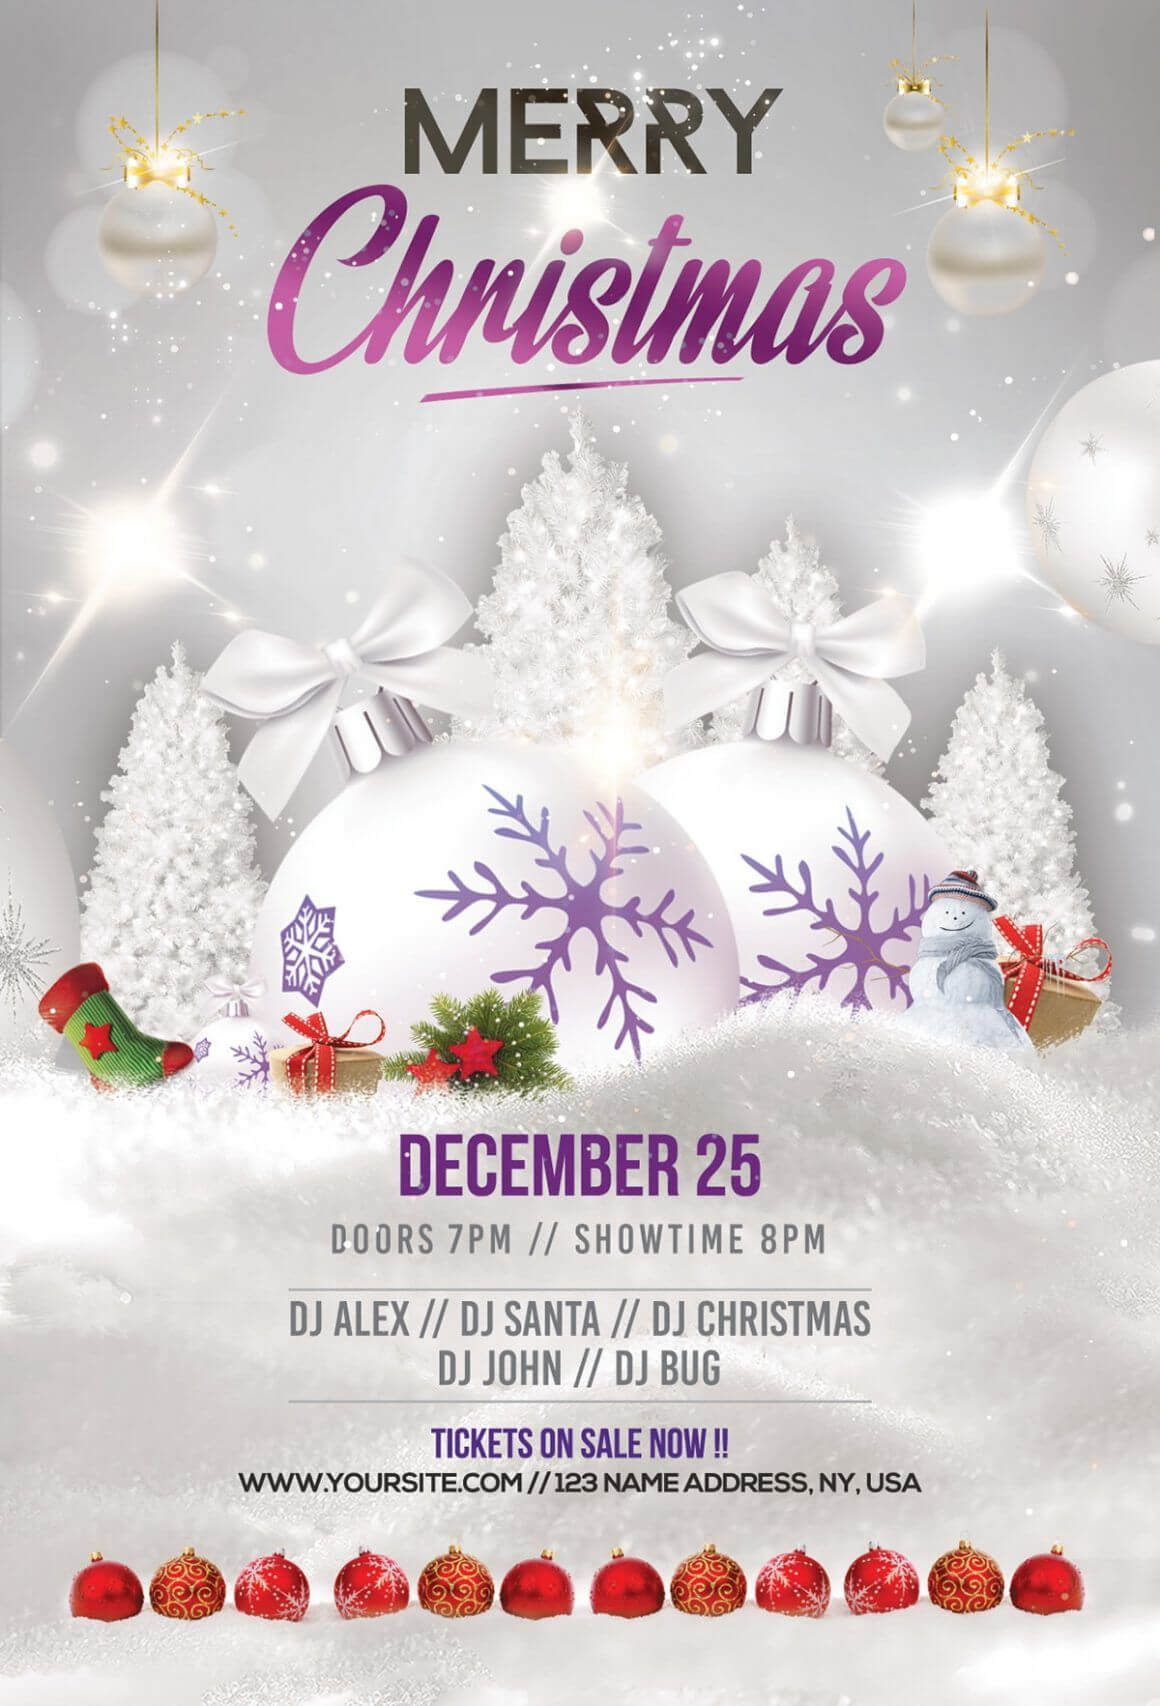 Merry Christmas & Holiday Free Psd Flyer Template | Merry With Christmas Brochure Templates Free